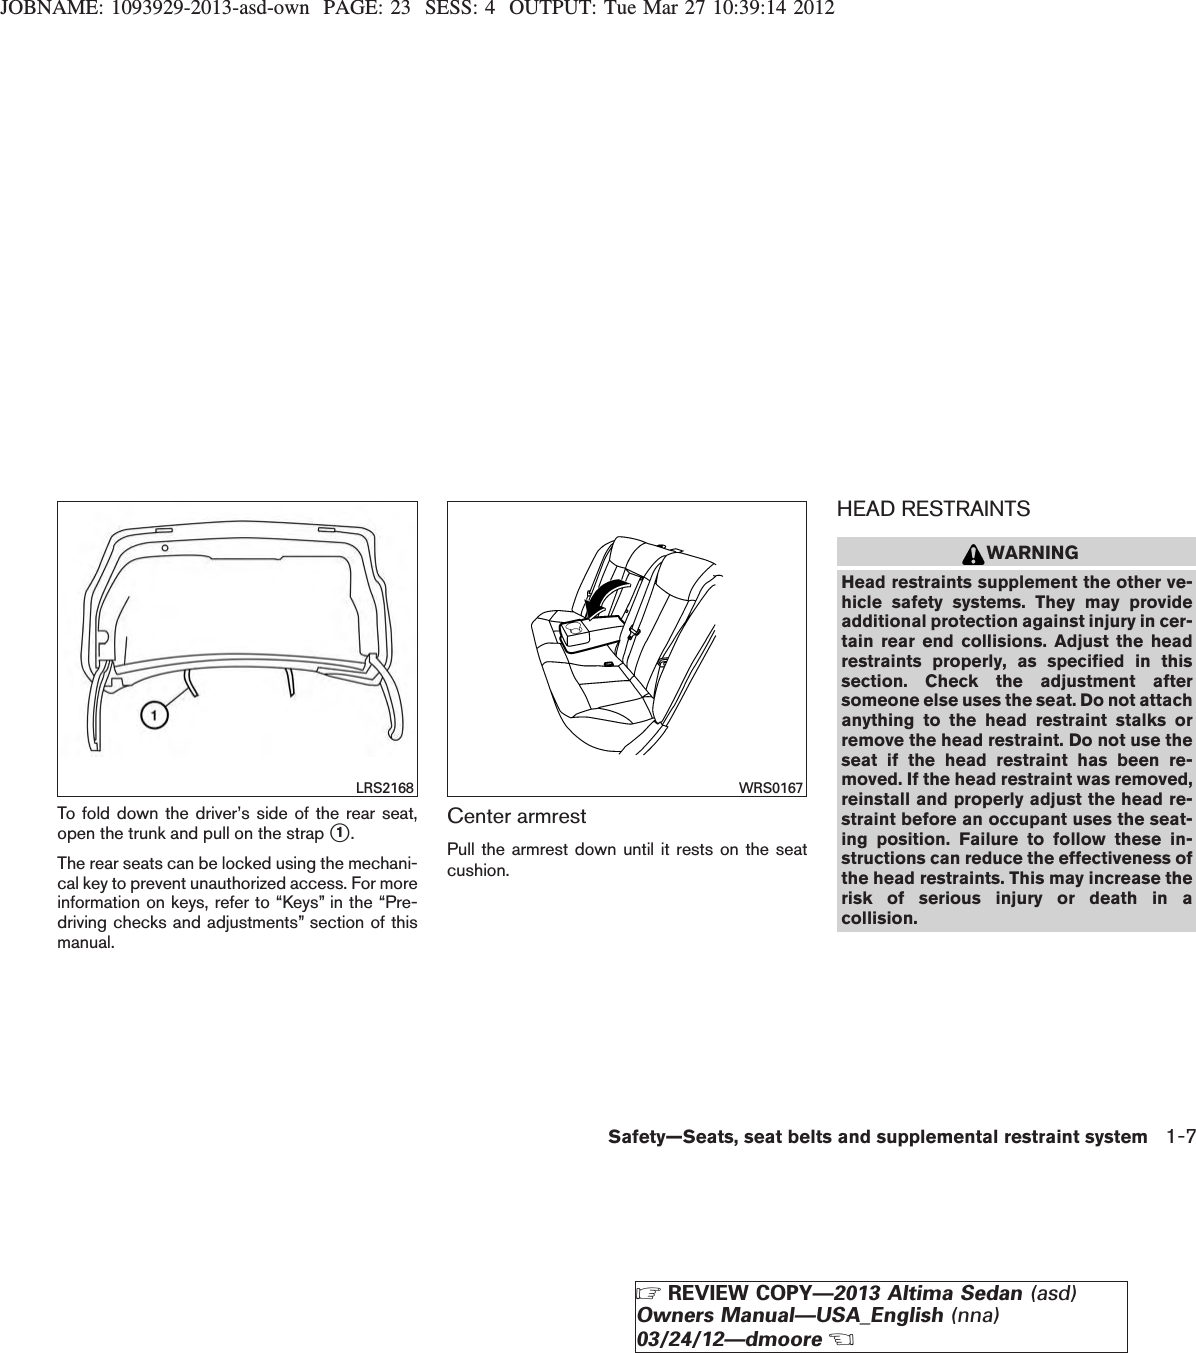 JOBNAME: 1093929-2013-asd-own PAGE: 23 SESS: 4 OUTPUT: Tue Mar 27 10:39:14 2012To fold down the driver’s side of the rear seat,open the trunk and pull on the strap s1.The rear seats can be locked using the mechani-cal key to prevent unauthorized access. For moreinformation on keys, refer to “Keys” in the “Pre-driving checks and adjustments” section of thismanual.Center armrestPull the armrest down until it rests on the seatcushion.HEAD RESTRAINTSWARNINGHead restraints supplement the other ve-hicle safety systems. They may provideadditional protection against injury in cer-tain rear end collisions. Adjust the headrestraints properly, as specified in thissection. Check the adjustment aftersomeone else uses the seat. Do not attachanything to the head restraint stalks orremove the head restraint. Do not use theseat if the head restraint has been re-moved. If the head restraint was removed,reinstall and properly adjust the head re-straint before an occupant uses the seat-ing position. Failure to follow these in-structions can reduce the effectiveness ofthe head restraints. This may increase therisk of serious injury or death in acollision.LRS2168 WRS0167Safety—Seats, seat belts and supplemental restraint system 1-7ZREVIEW COPY—2013 Altima Sedan (asd)Owners Manual—USA_English (nna)03/24/12—dmooreX